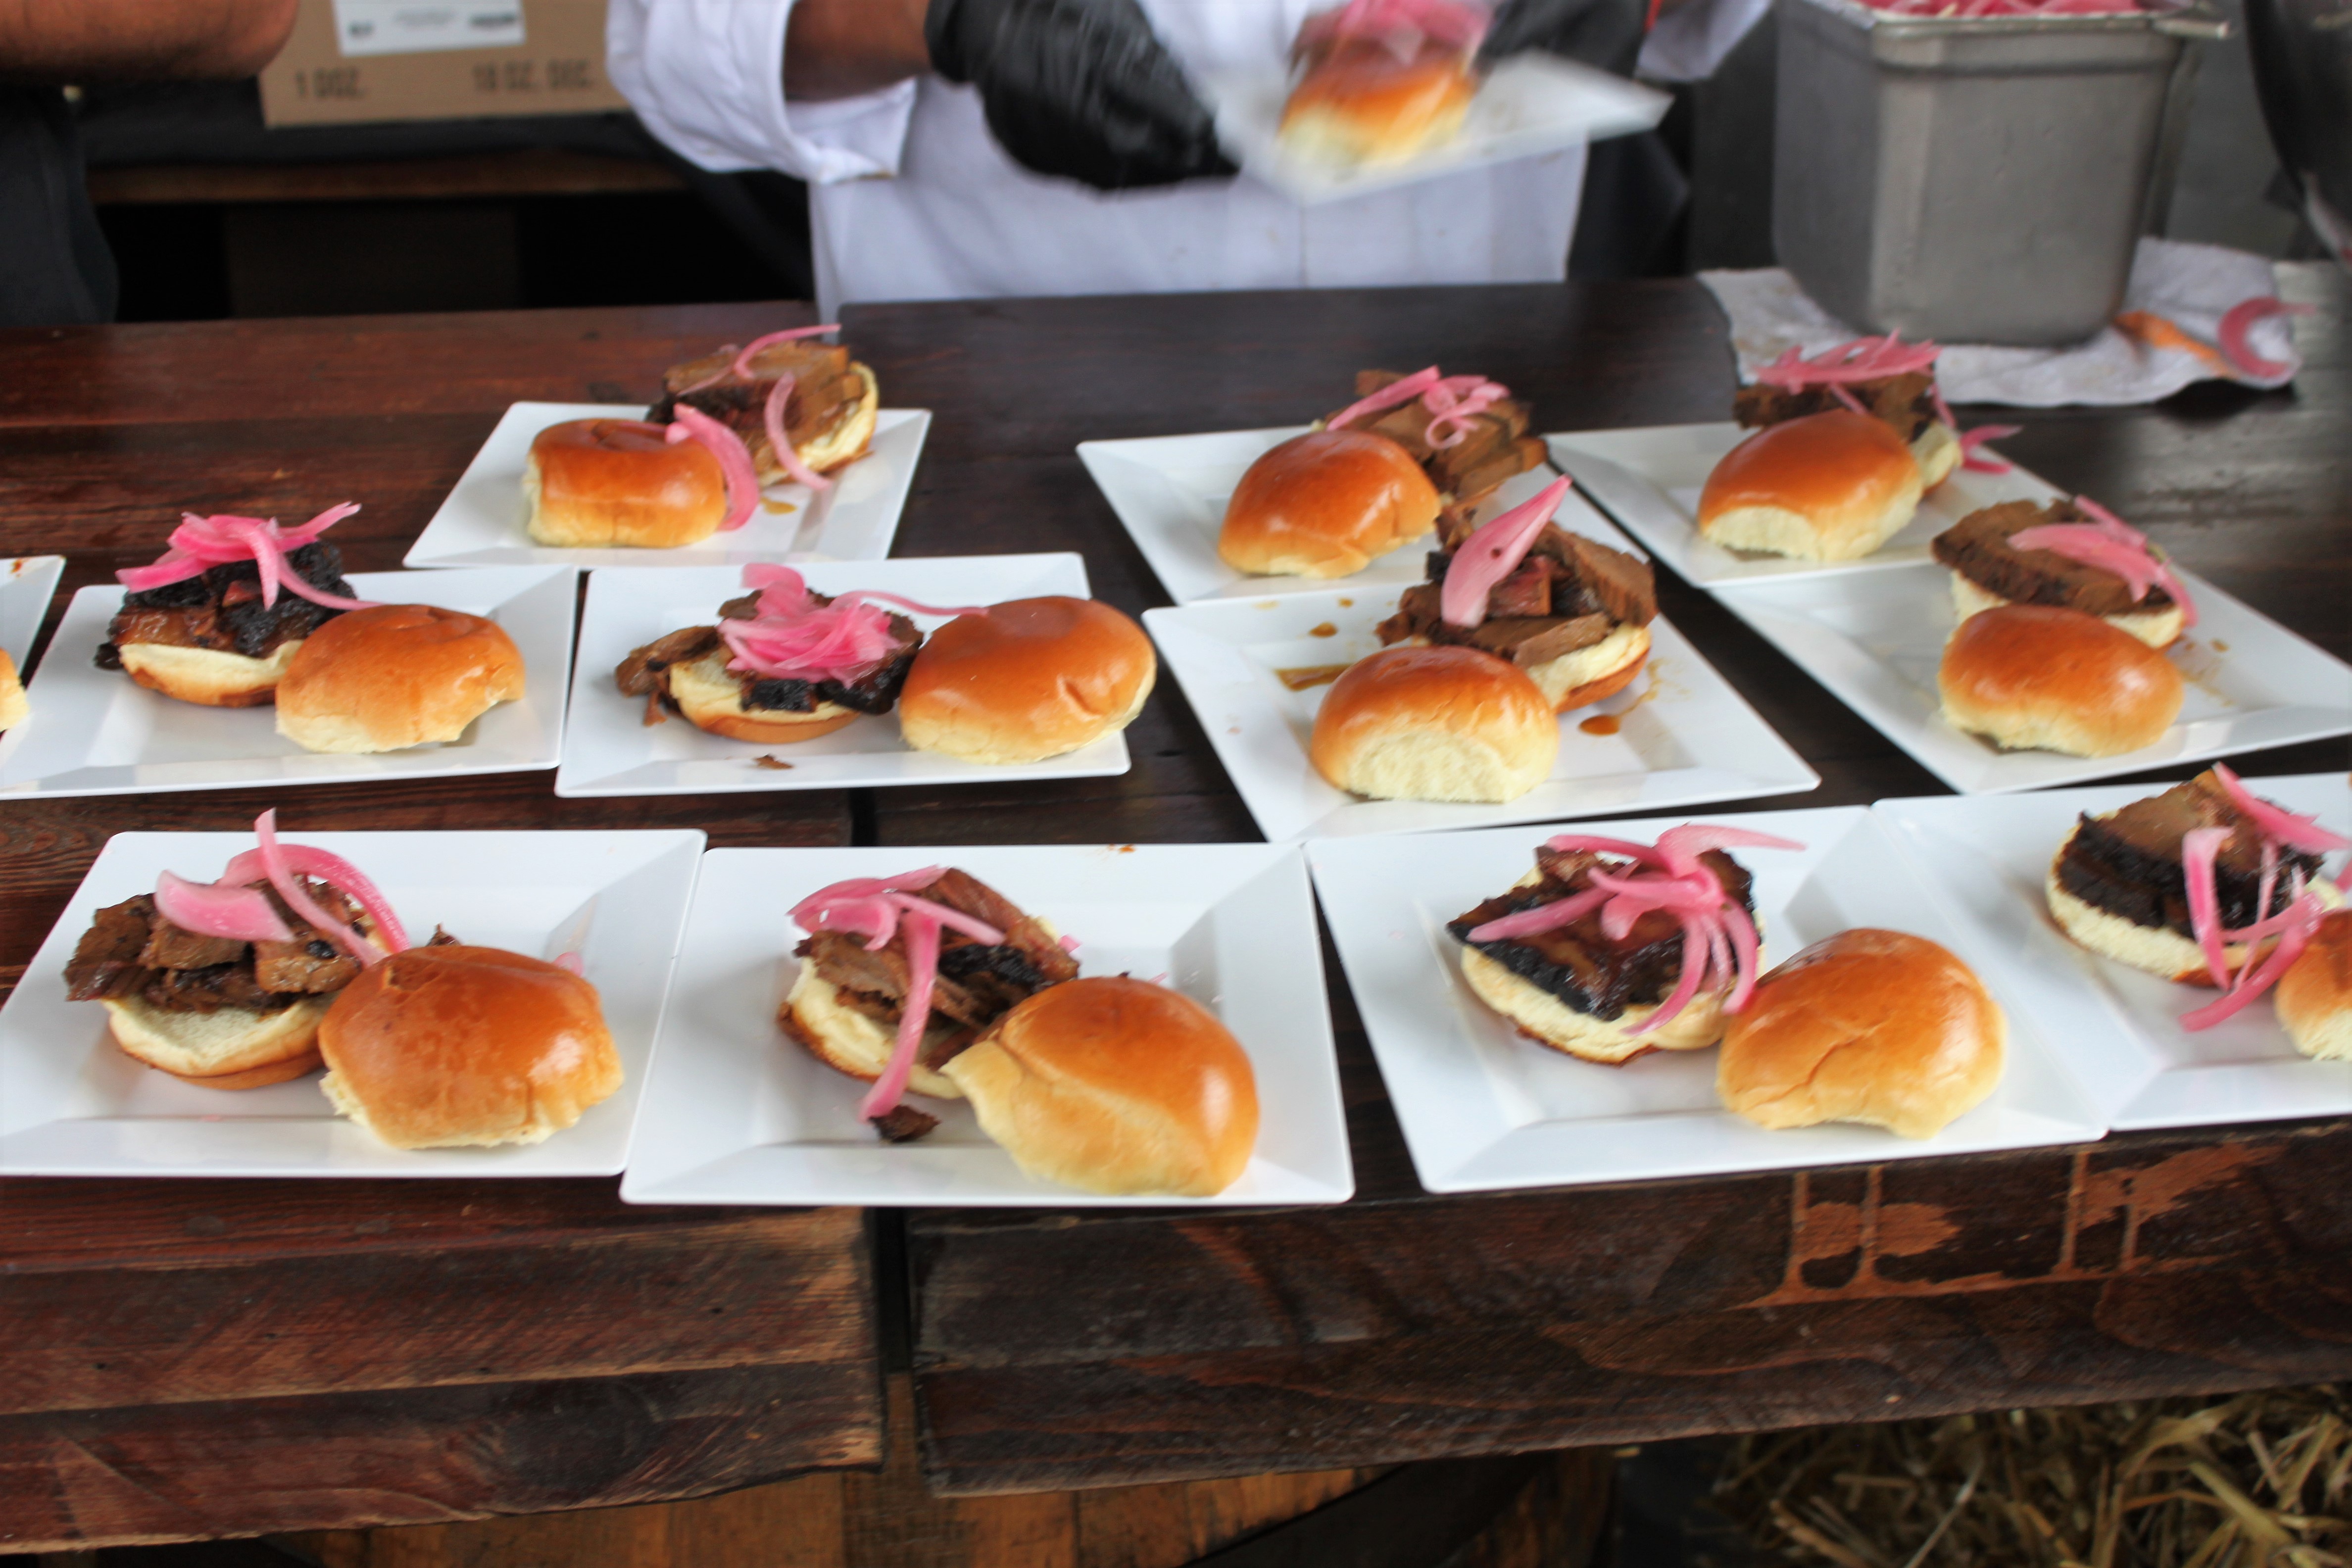 Old Crow Smokehouse at Chicago Gourmet was one of my favorites this year! 